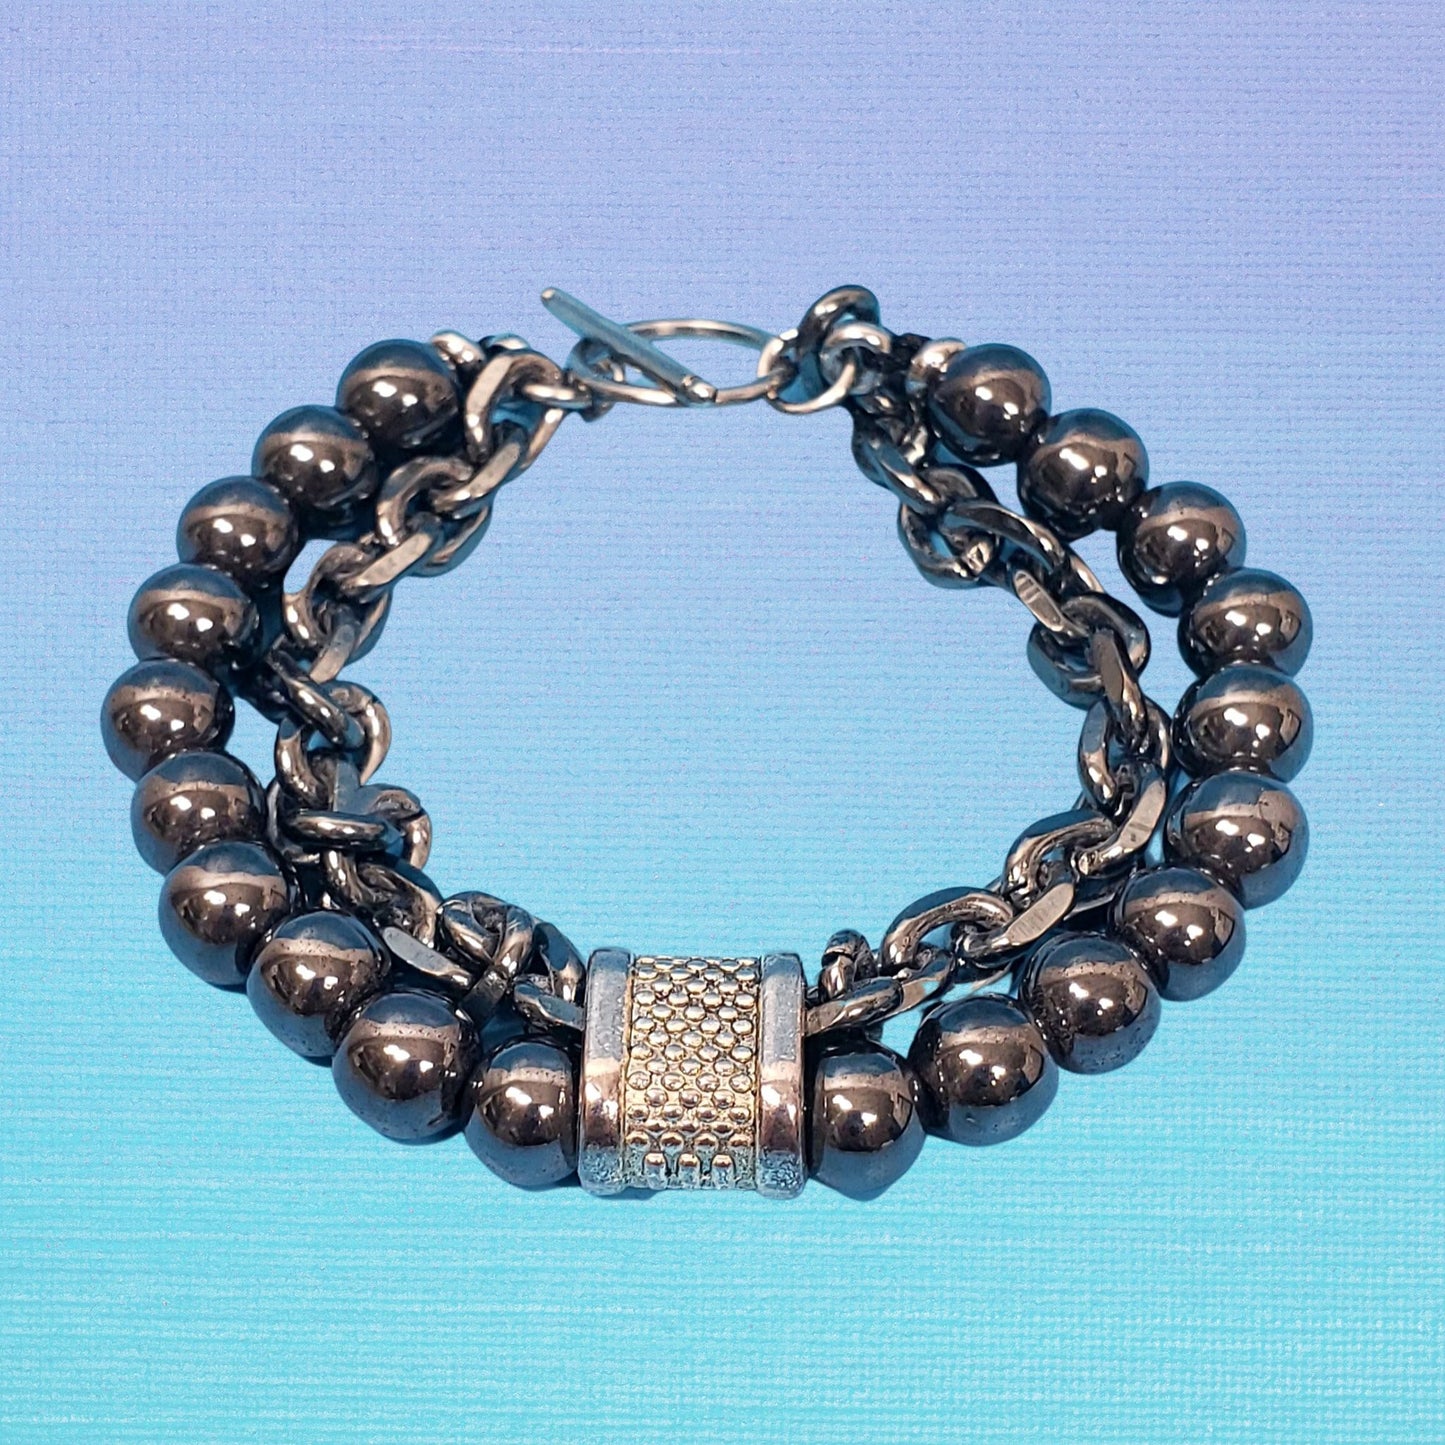 Hematite Bracelet with Chain and Toggle Clasp